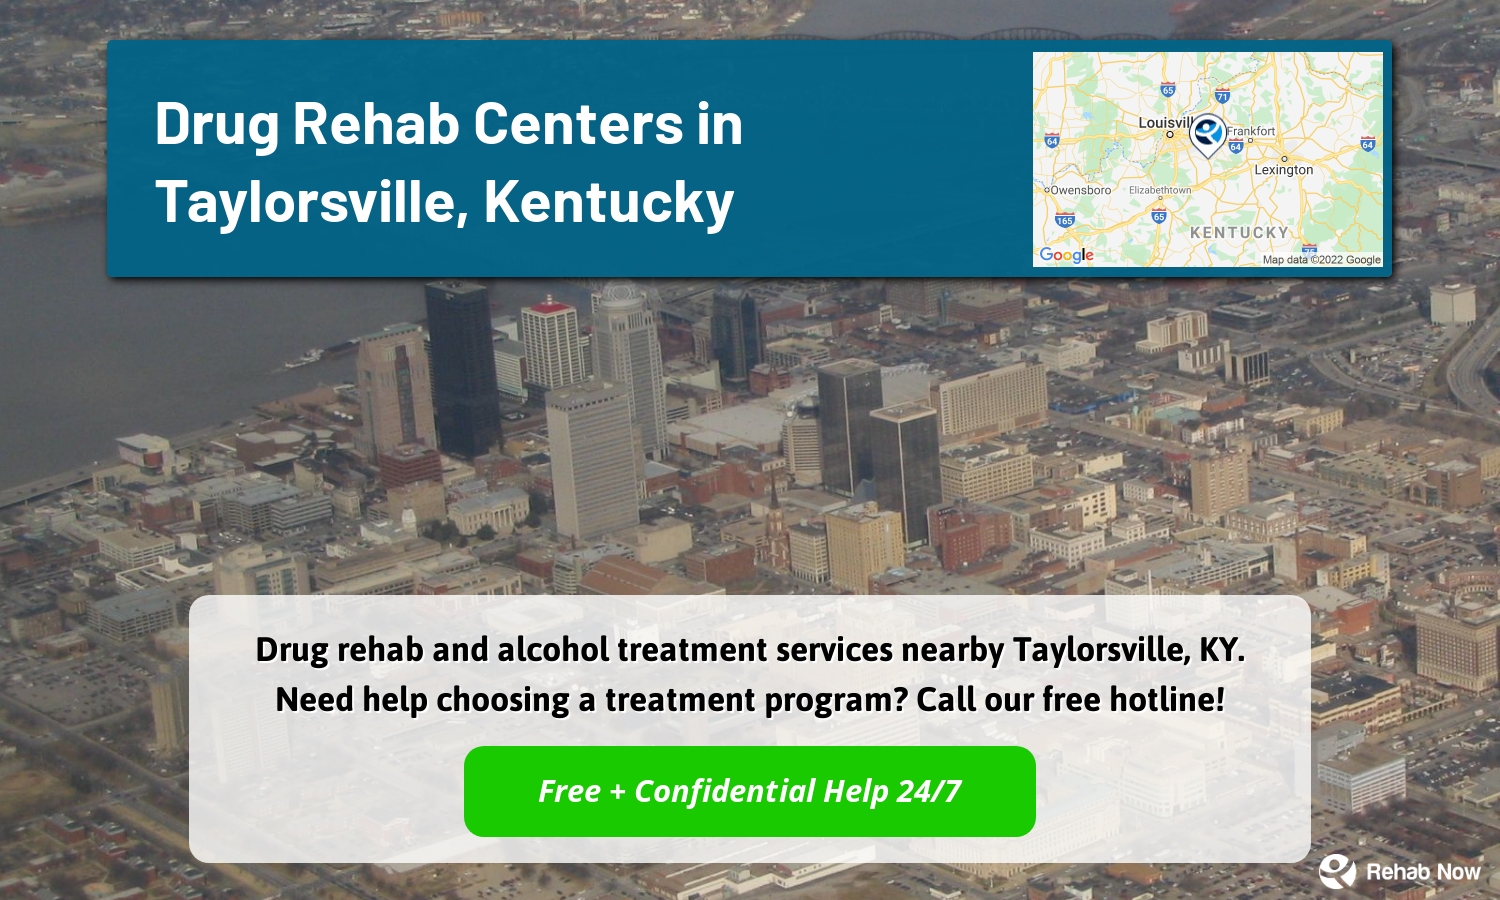 Drug rehab and alcohol treatment services nearby Taylorsville, KY. Need help choosing a treatment program? Call our free hotline!